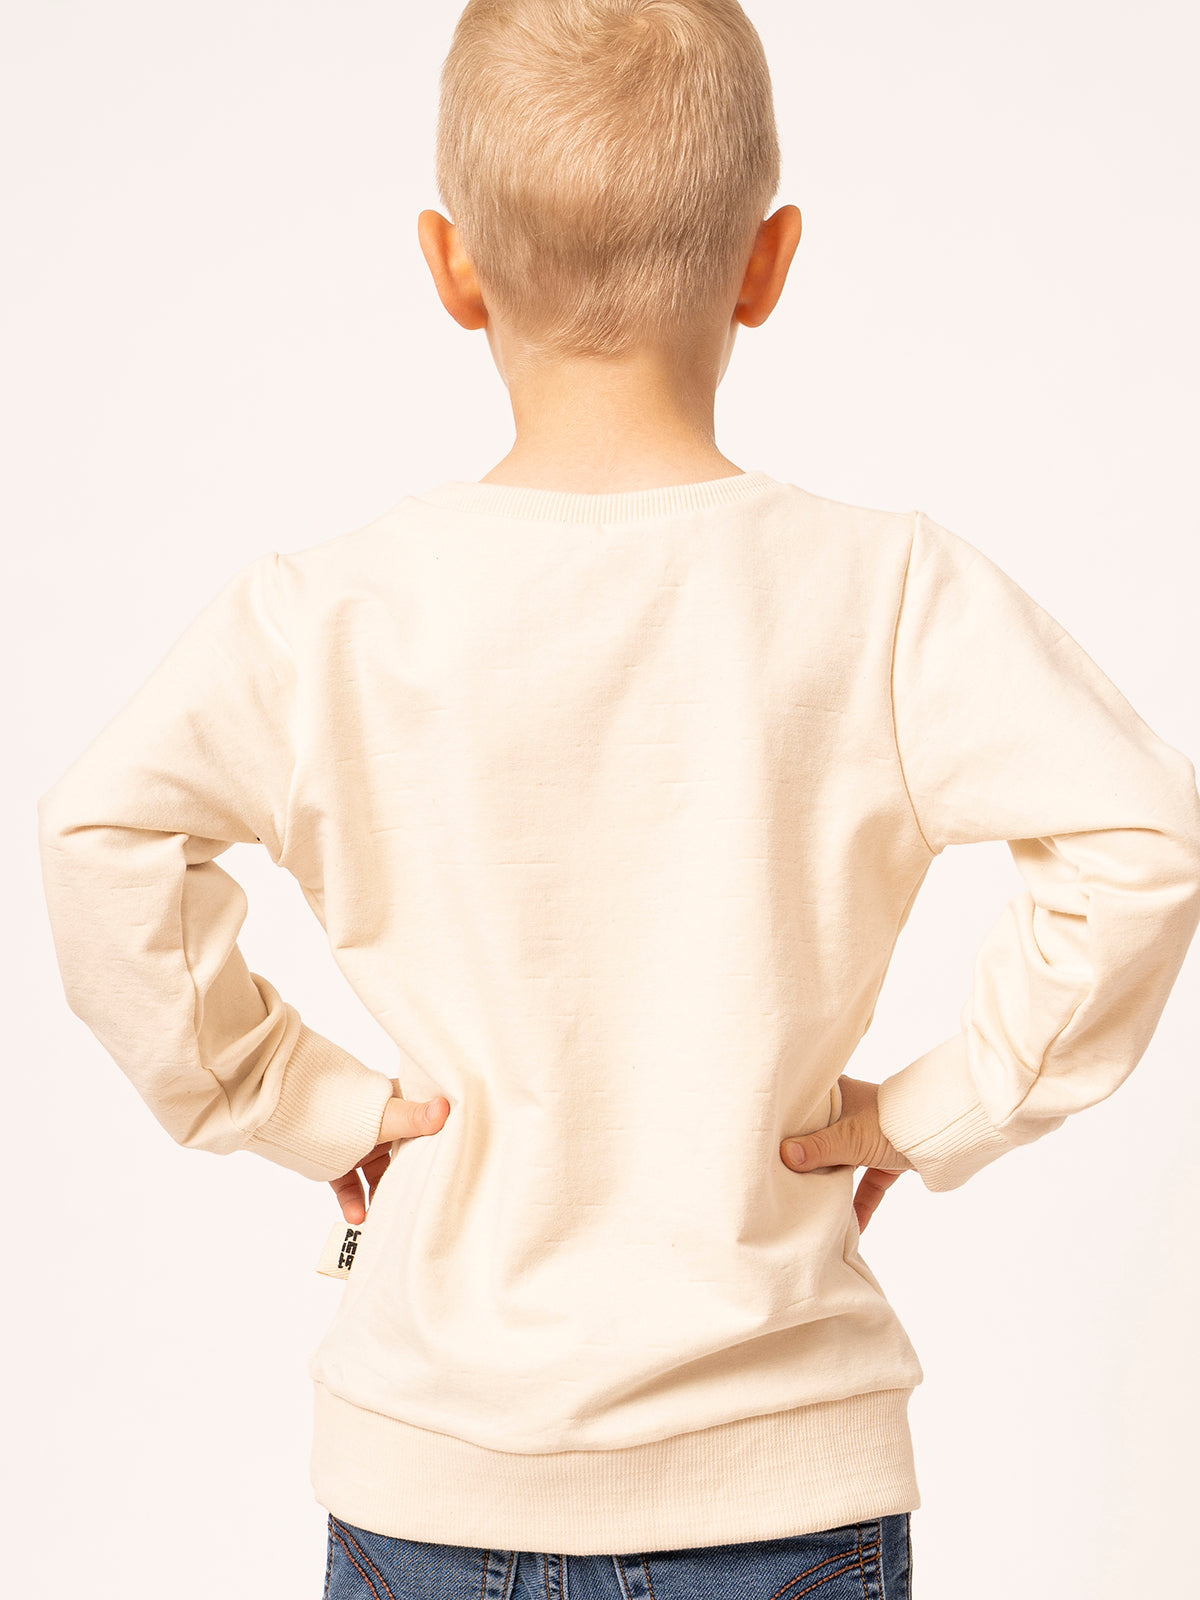 Natural children's sweater with shirt lining